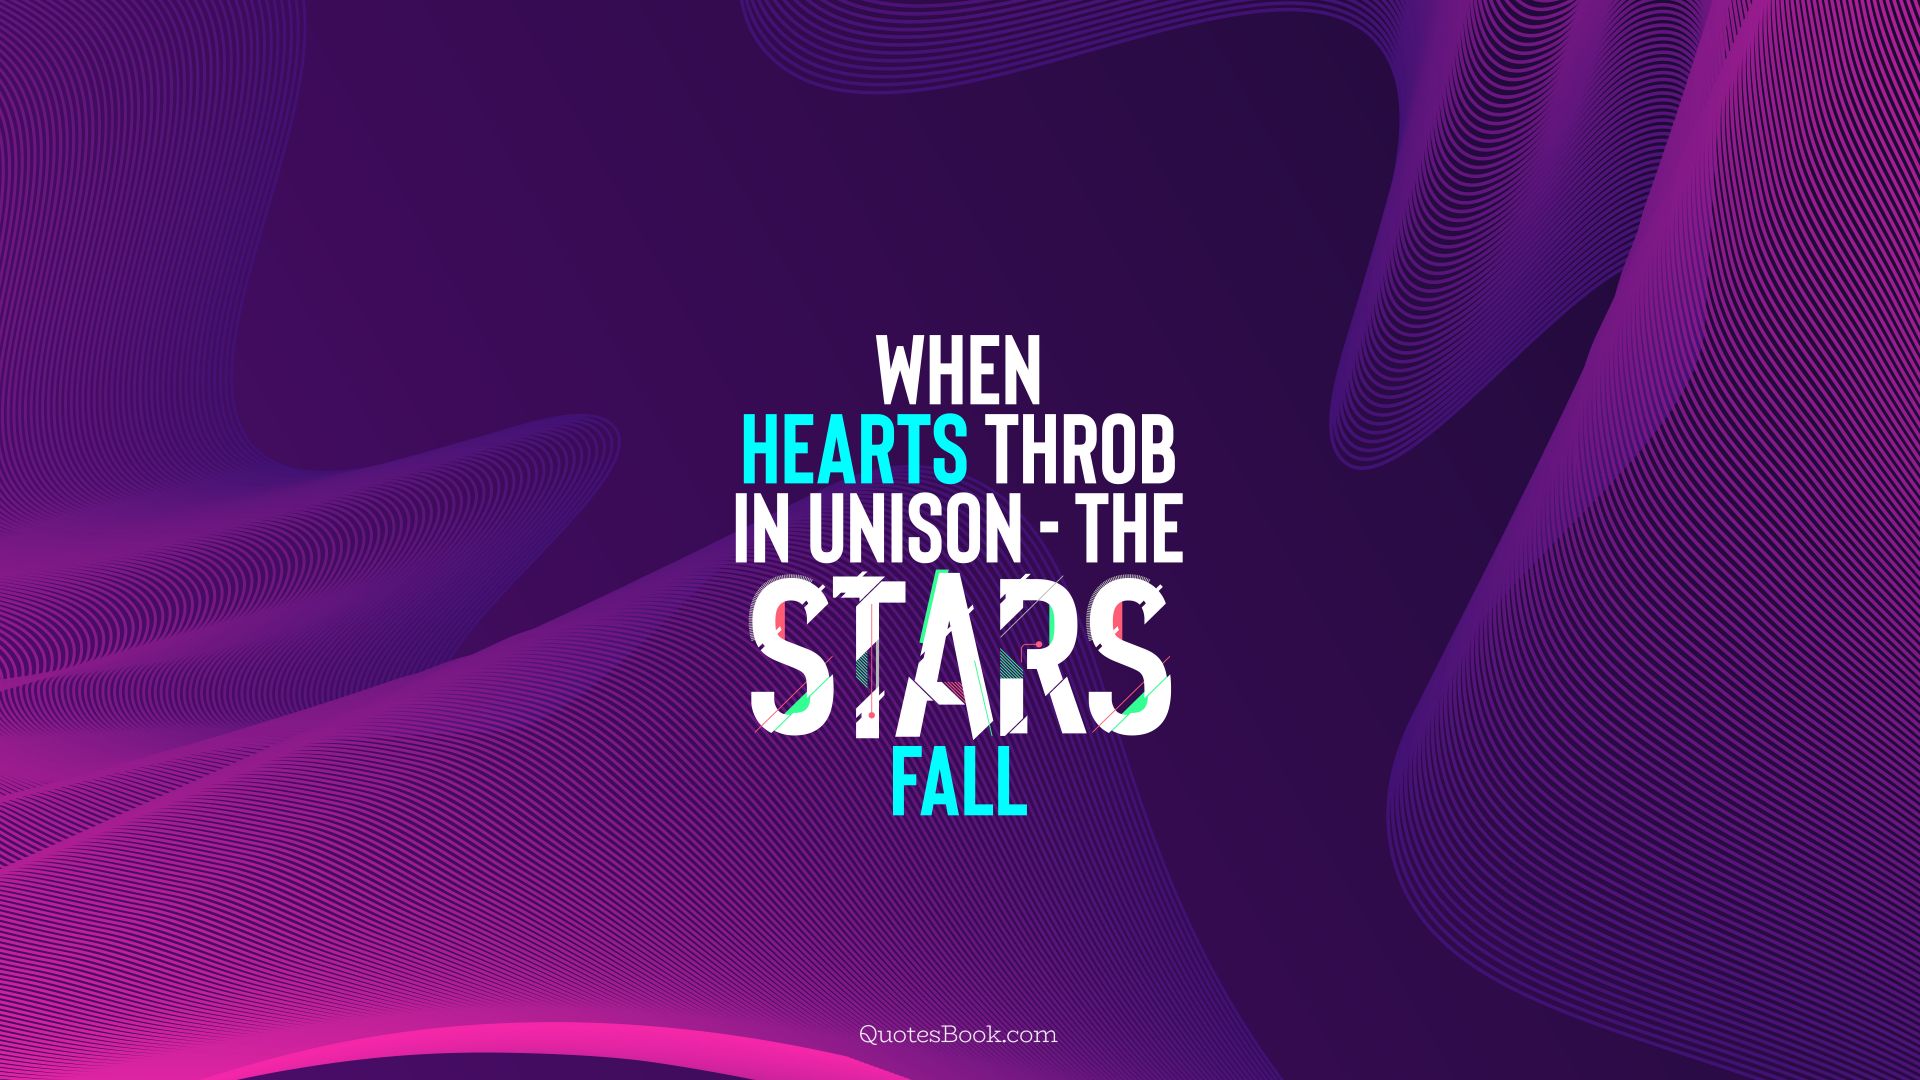 When hearts throb in unison - the stars fall. - Quote by QuotesBook